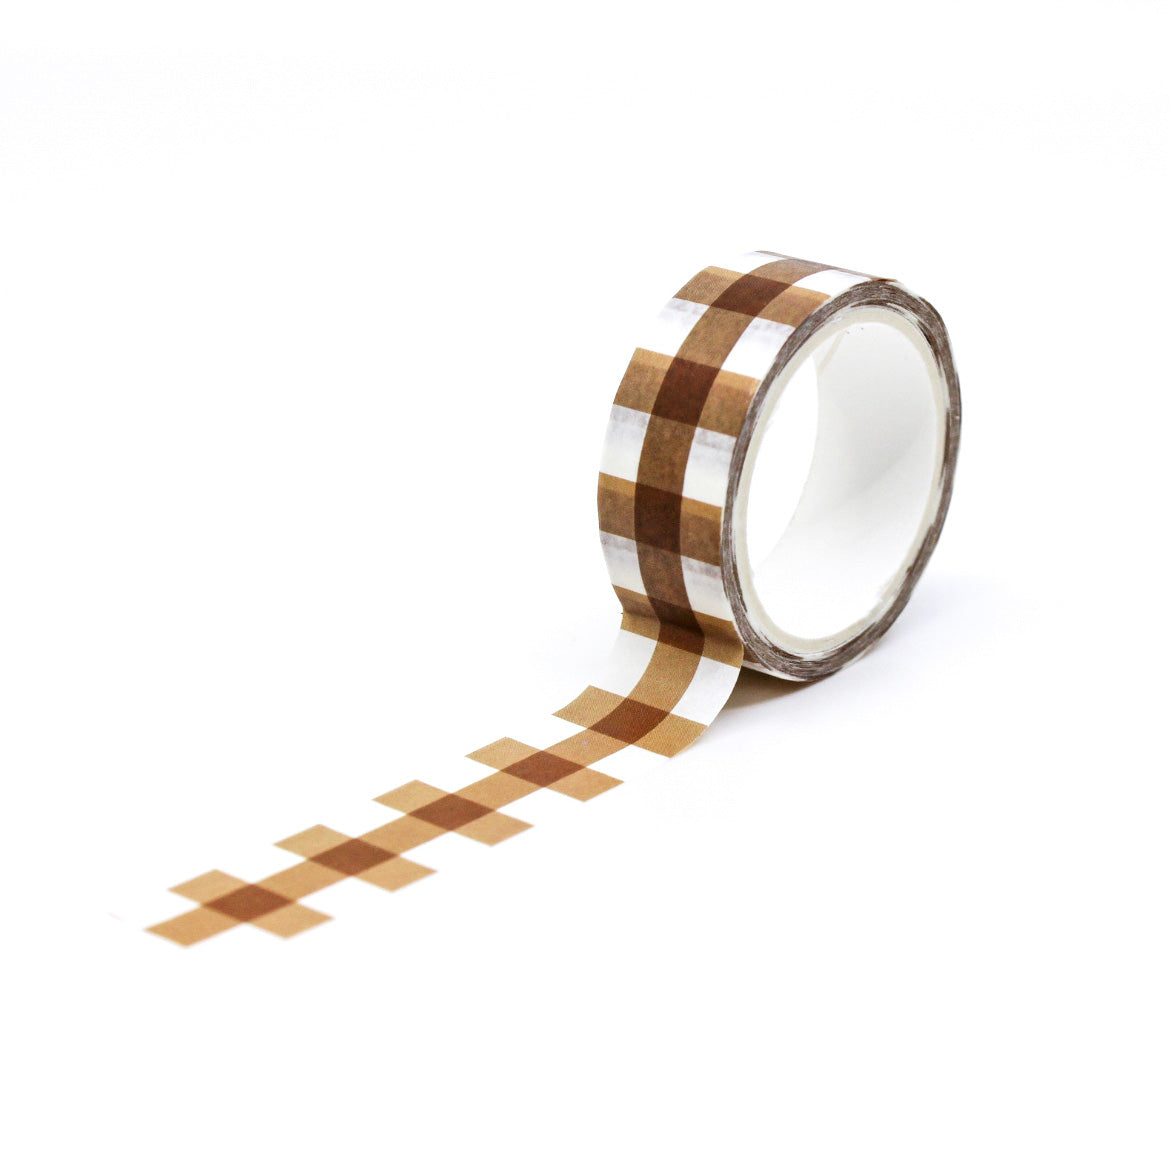 Add a rustic touch to your projects with this brown plaid washi tape. Perfect for scrapbooking, card making, or decorating journals and planners. This washi tape is sold at BBB Supplies Craft Shop.